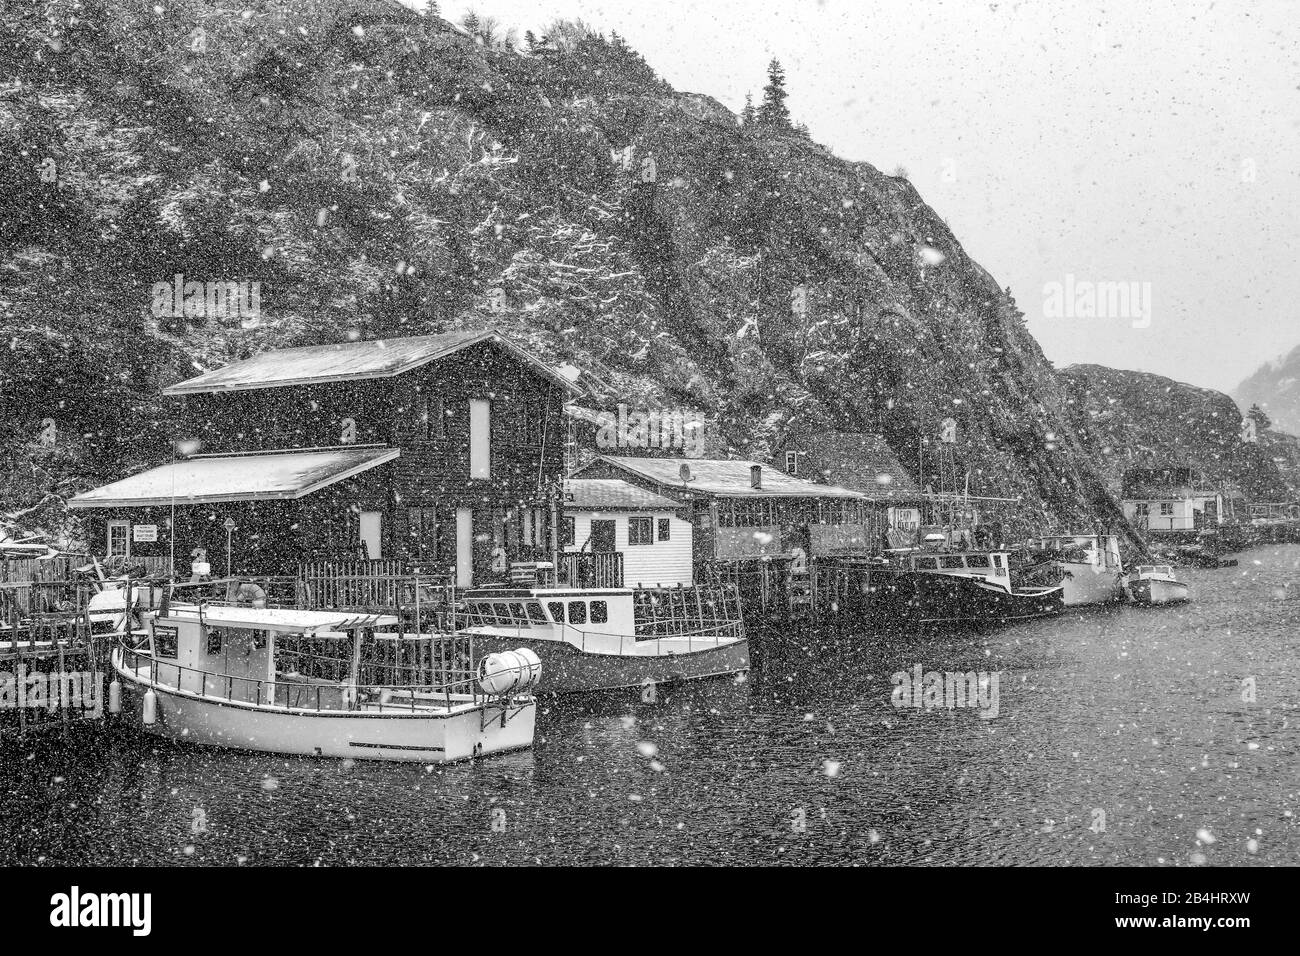 Snow falling on the colorful fishing village of Quidi Vidi, St. John's, Newfoundland, Canada [No property releases; available for editorial licensing Stock Photo